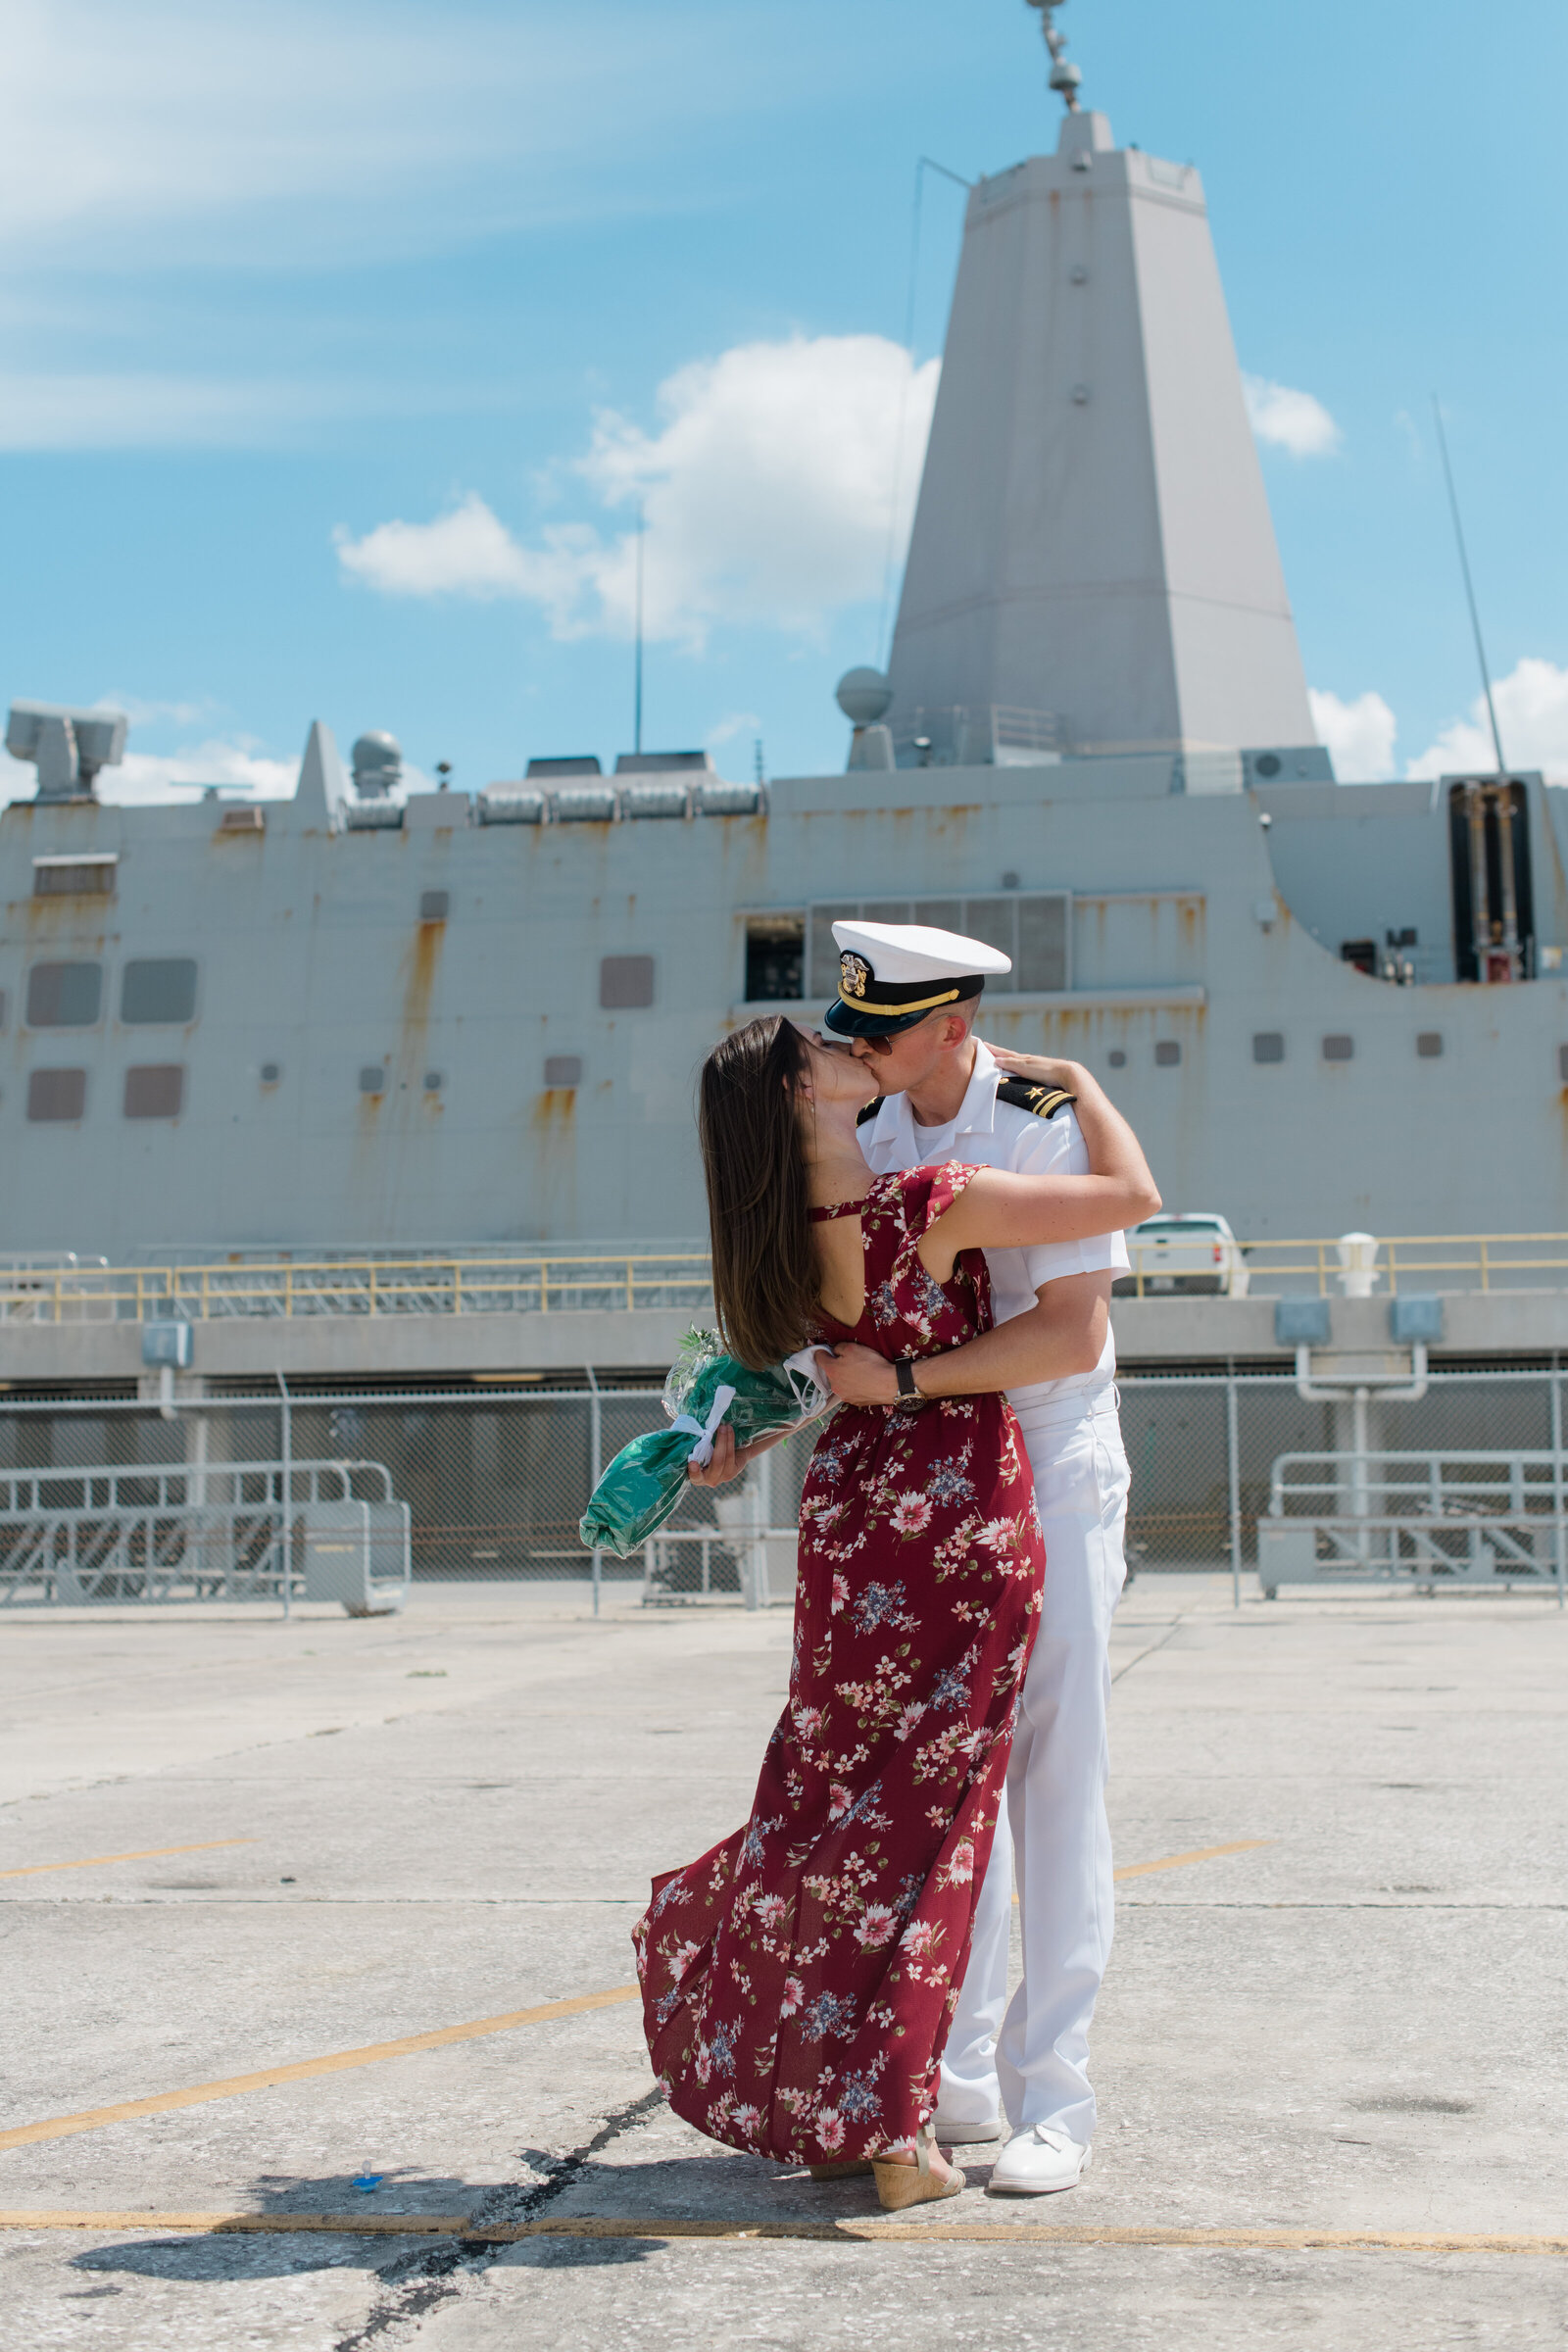 Couple embraces after long Navy deployment at homecoming